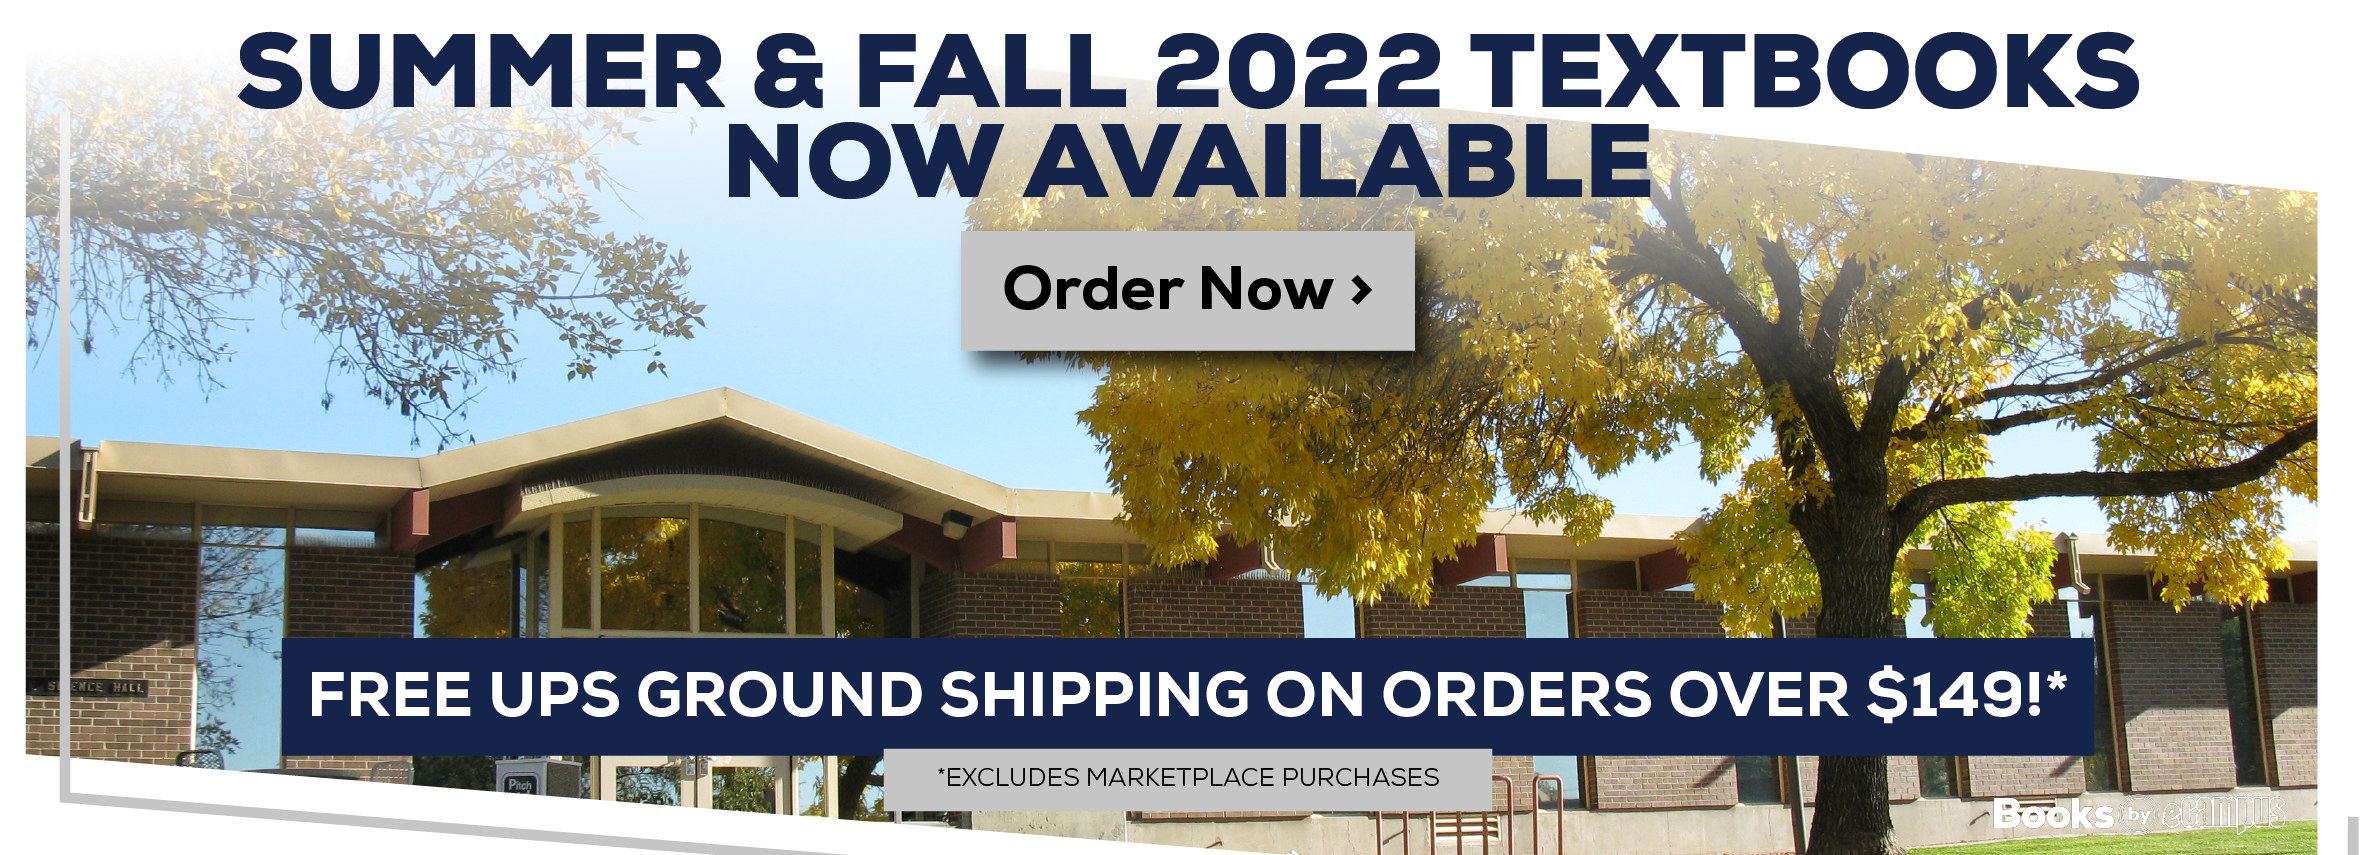 summer and Fall 2022 Textbooks now available. Order now free ups ground shipping on orders over $149!